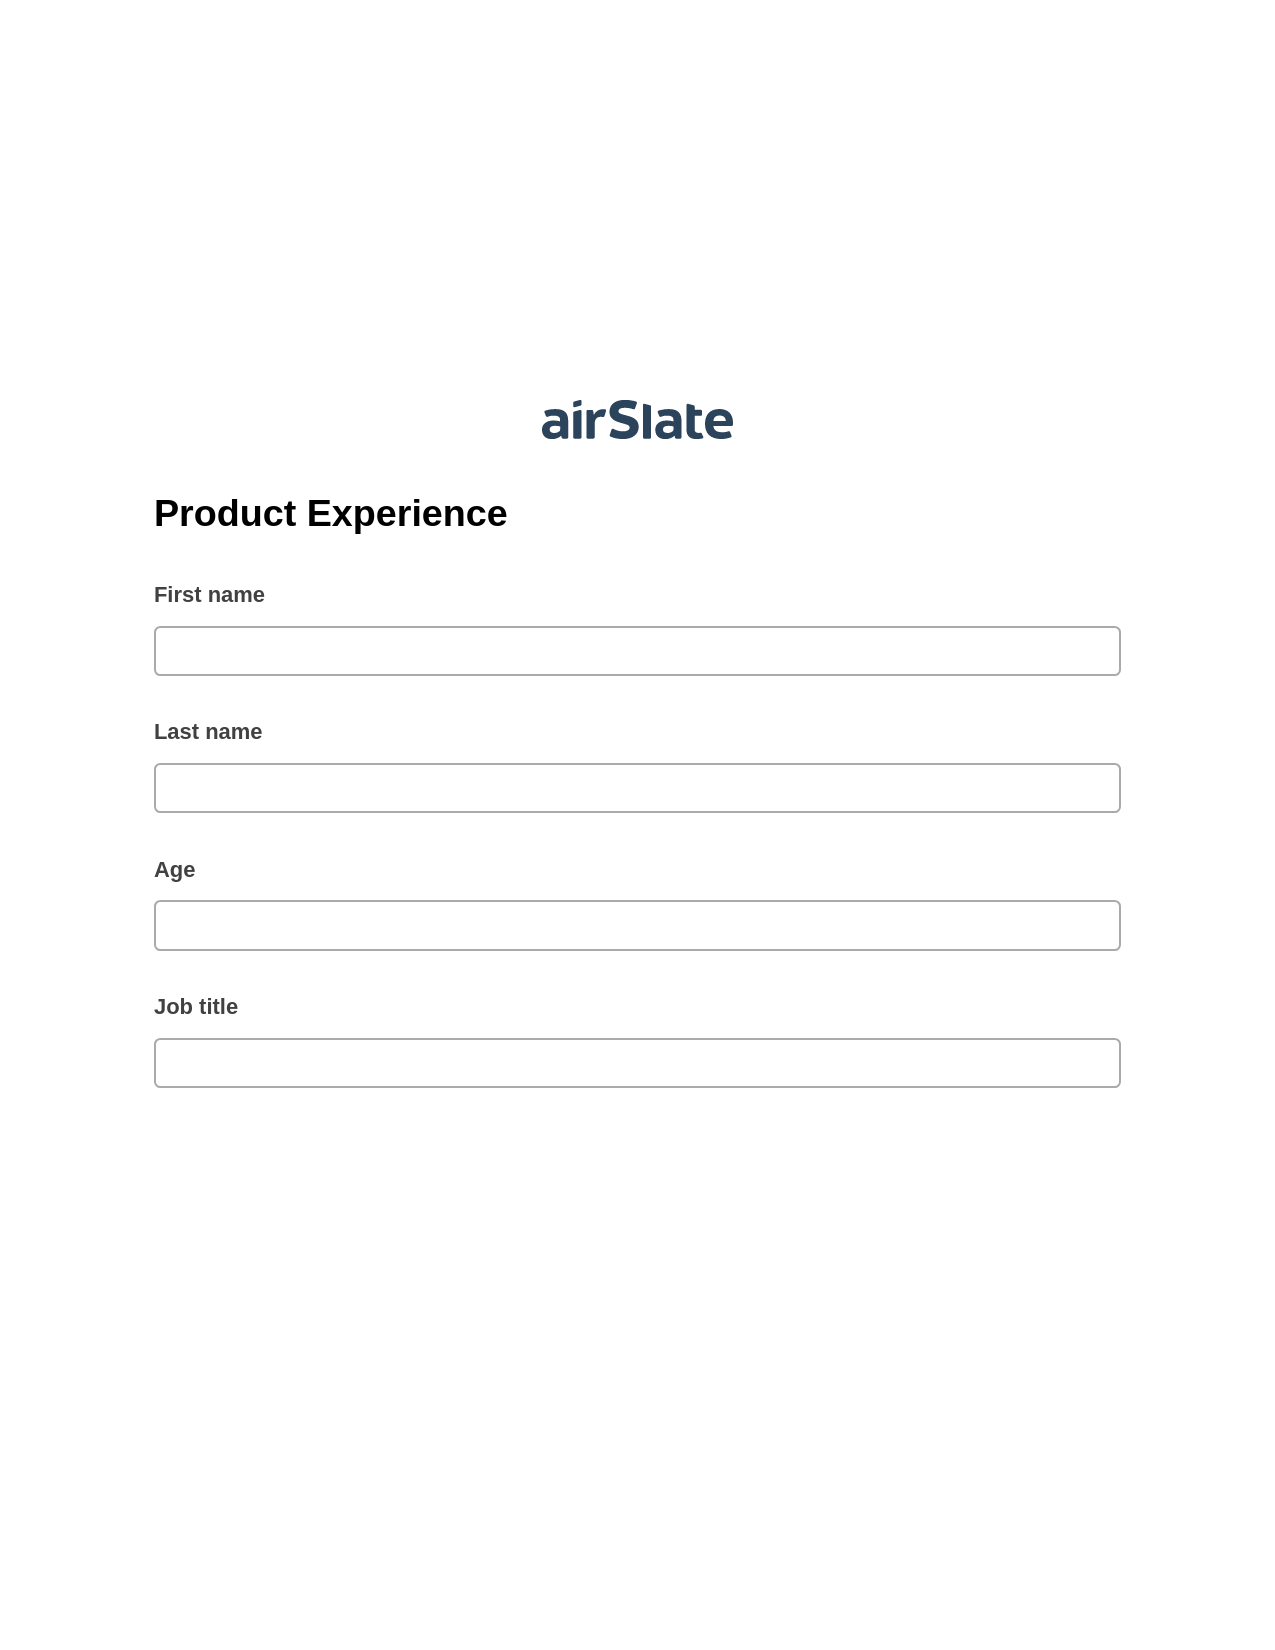 Multirole Product Experience Pre-fill from CSV File Bot, Hide Signatures Bot, Export to Salesforce Record Bot